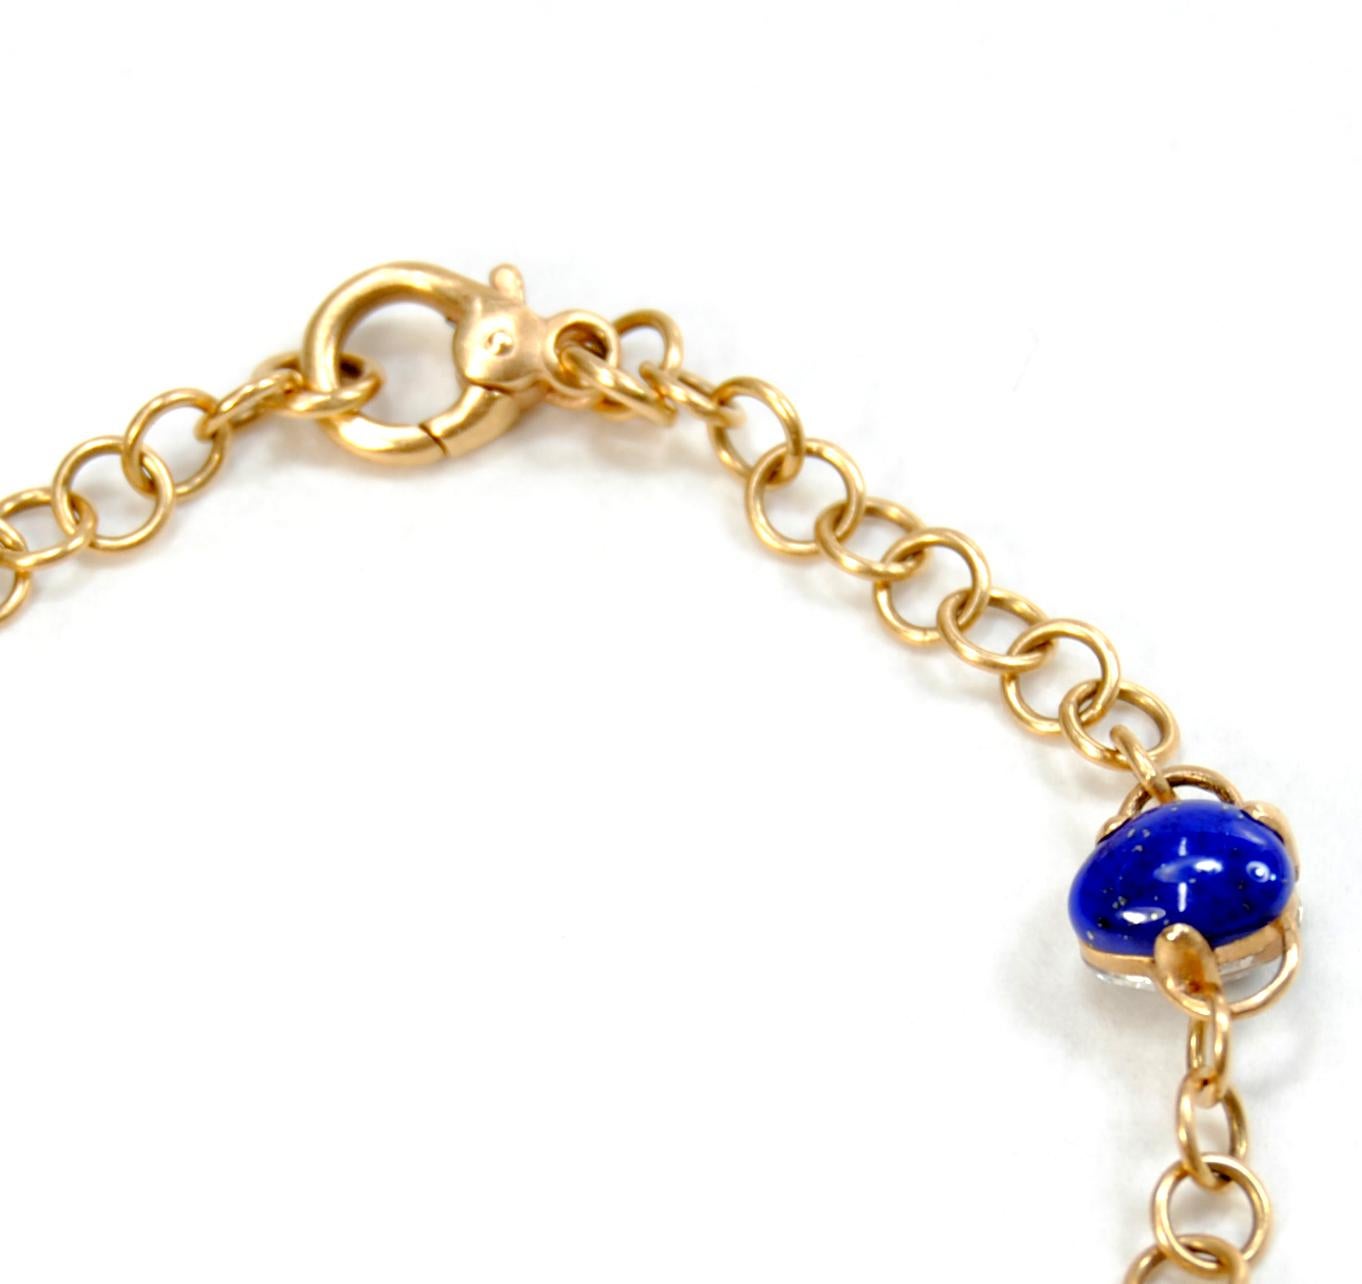 Contemporary Pomellato Capri Collection Pink Gold with Lapis lazuli and Rock Crystal Bracelet